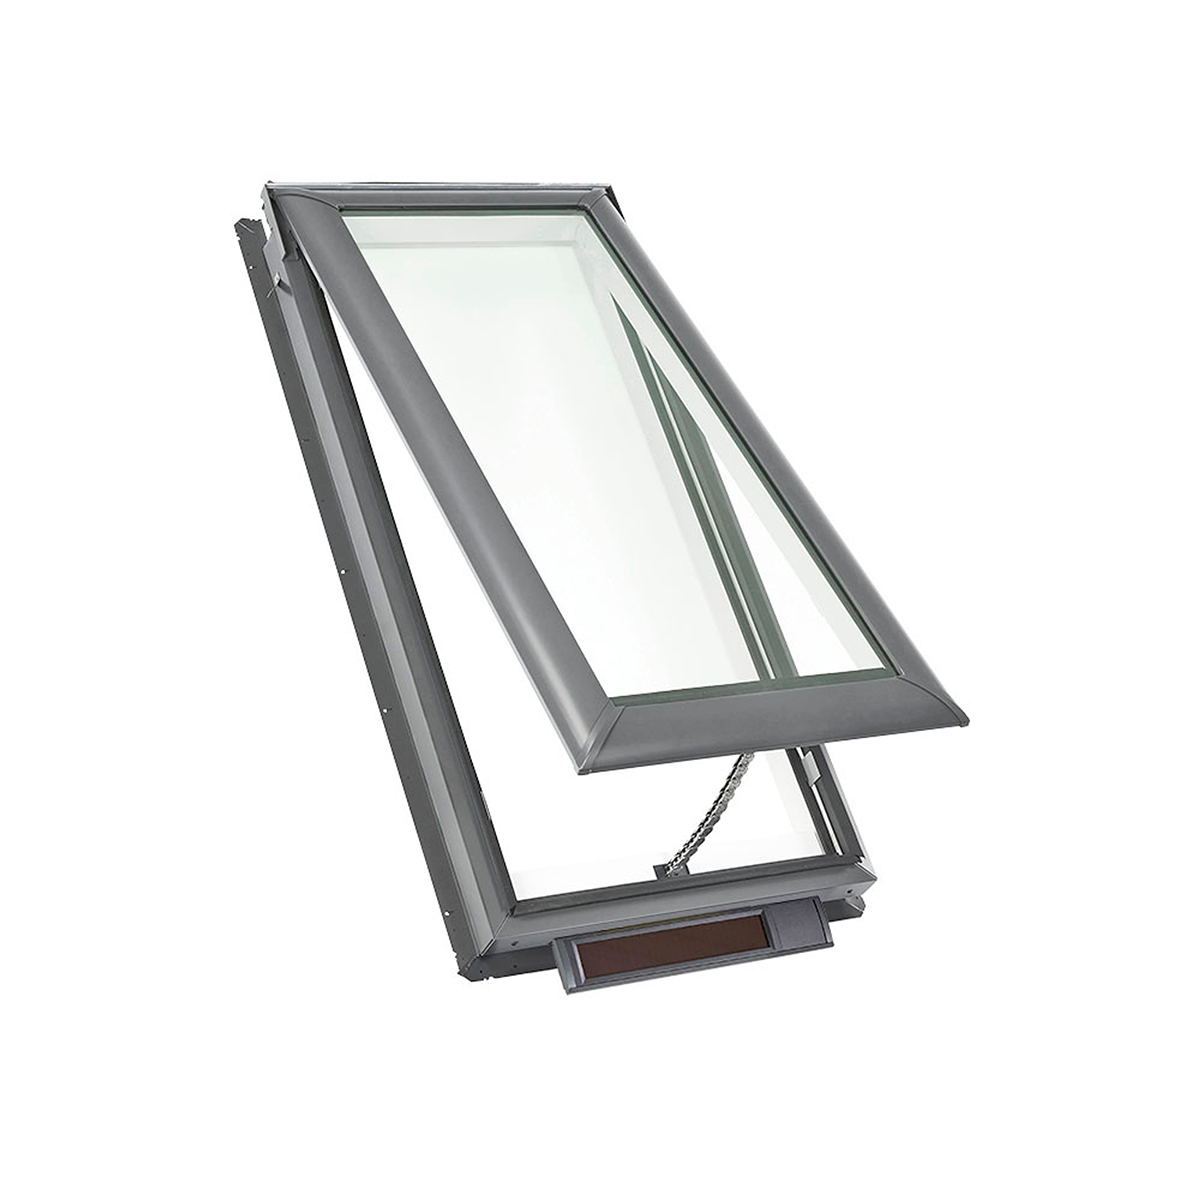 Solar Powered Deck-Mount Skylight with Laminated Low-E3 Glass - 30-1/16 in. x 54-7/16 in. - VSS M08